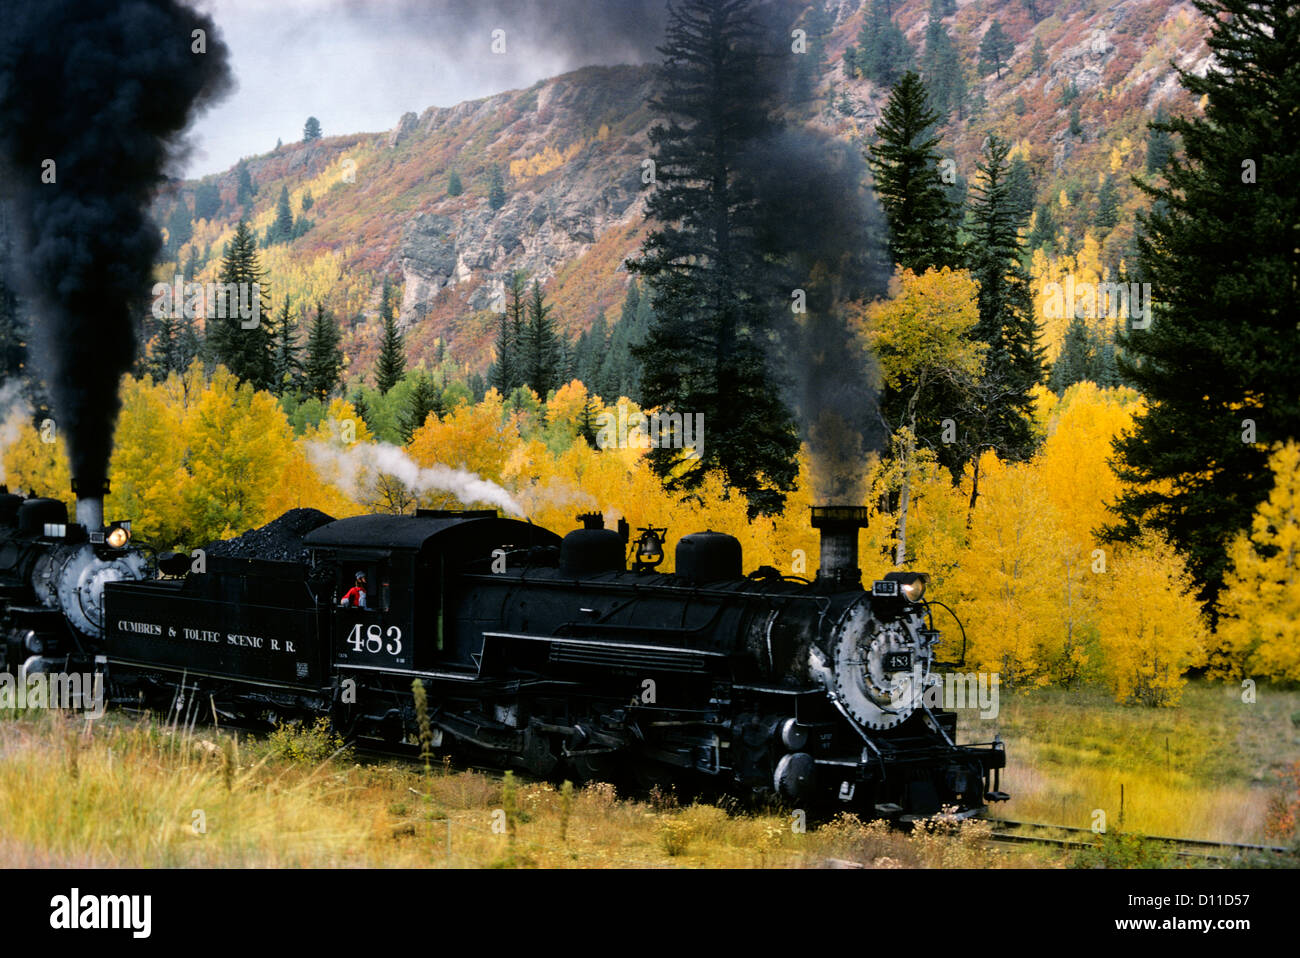 1980s NARROW GAUGE RAILROAD IN AUTUMN CHAMA NM WITH TWO ENGINES TAKING TRAIN UP A GRADE Stock Photo